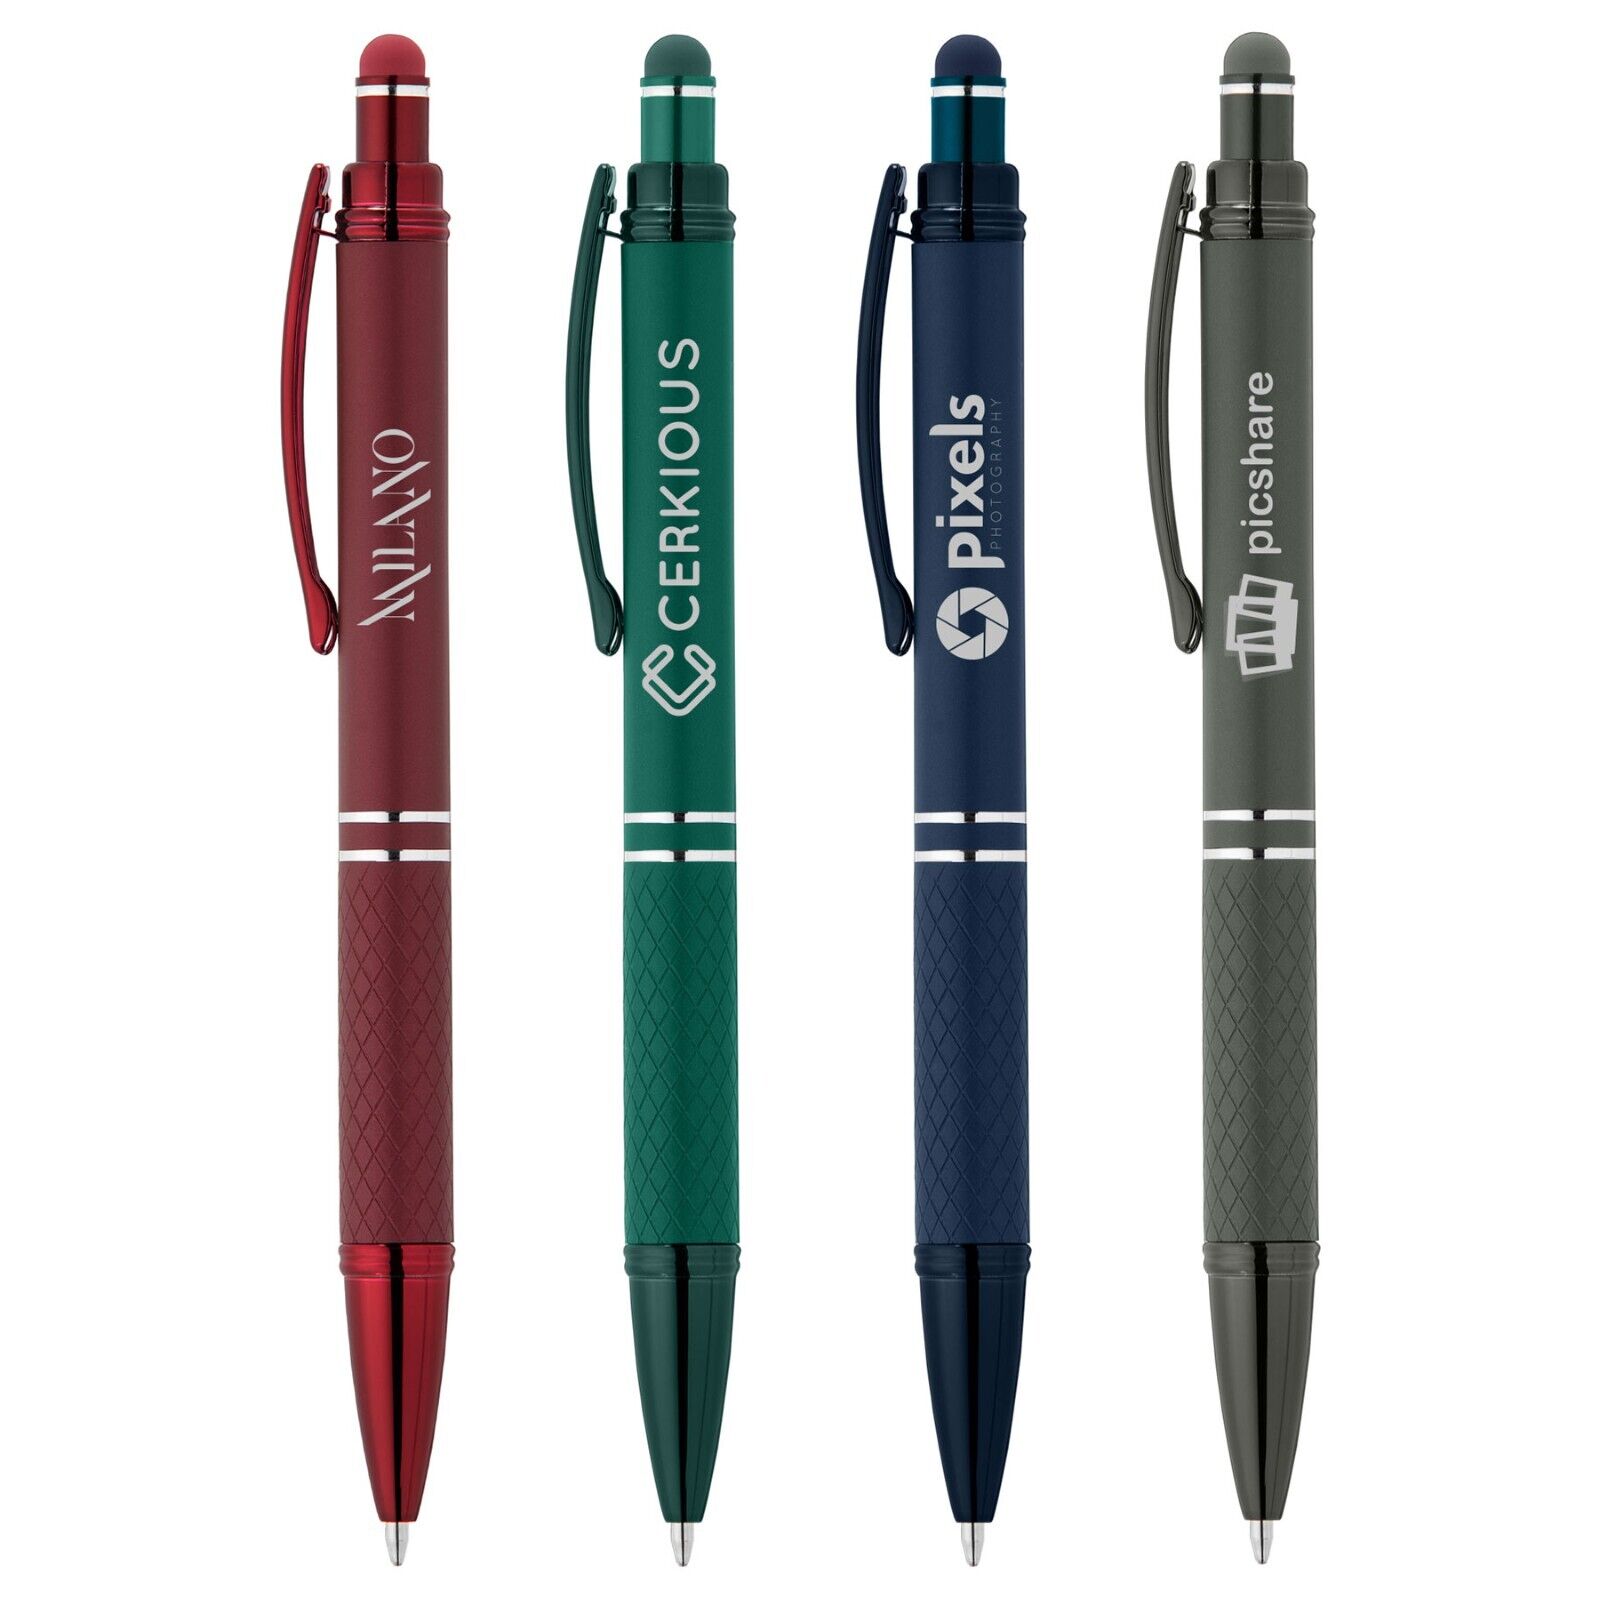 Promote Your Brand Phoenix Softy Monochrome Stylus Pen Engraved with your logo